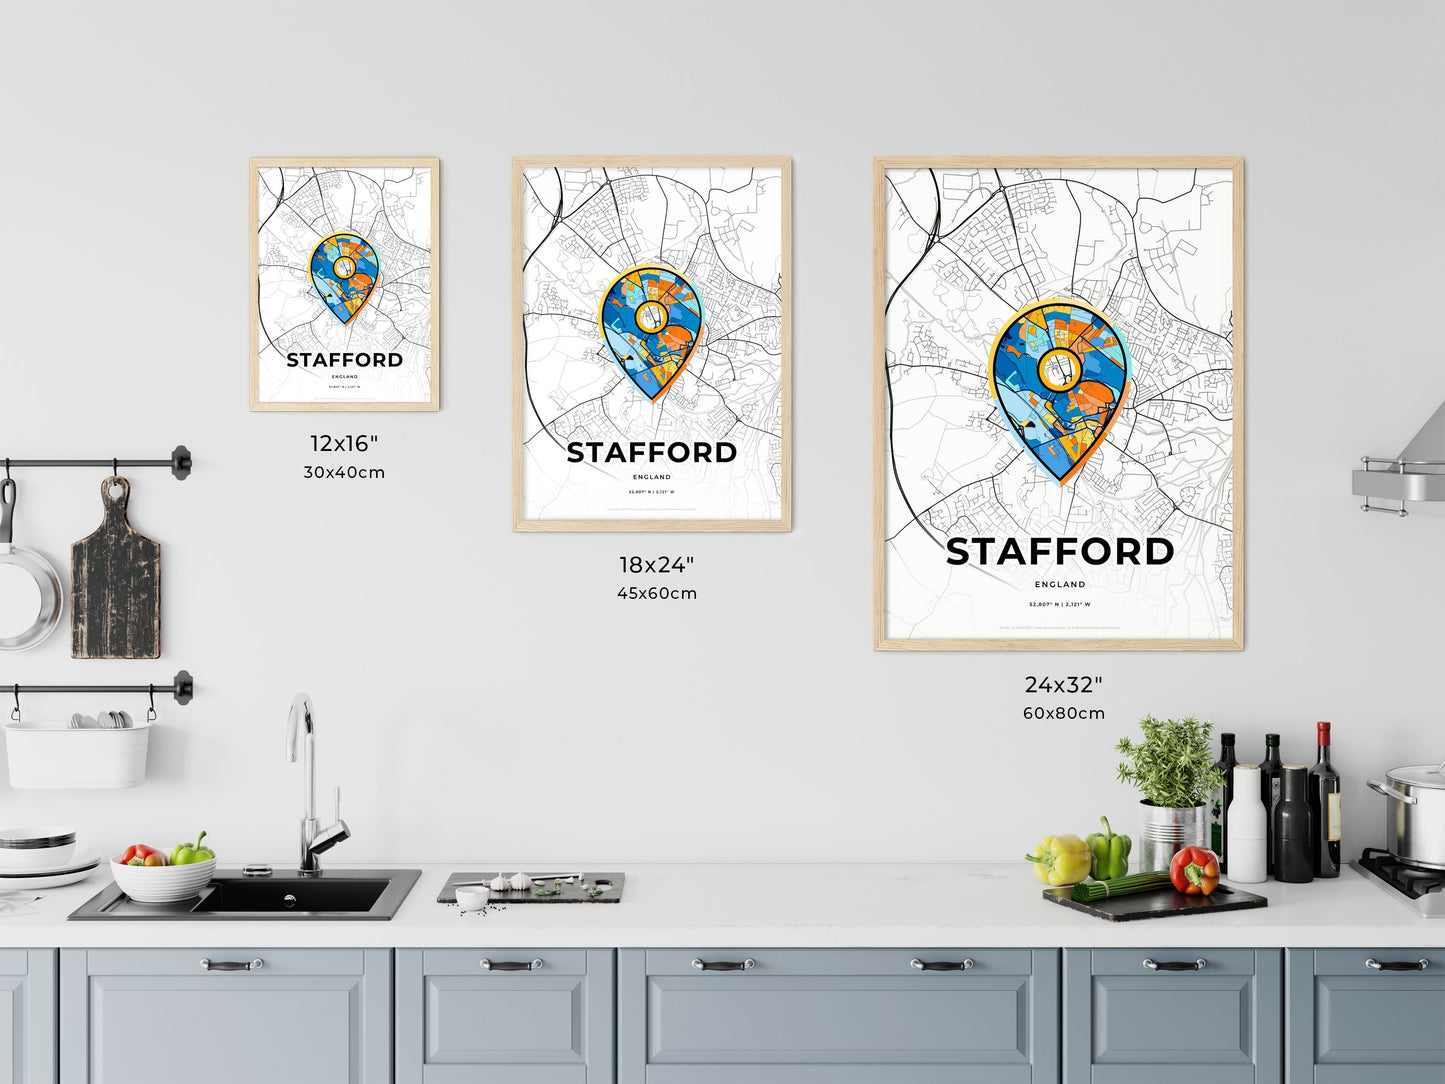 STAFFORD ENGLAND minimal art map with a colorful icon. Where it all began, Couple map gift.